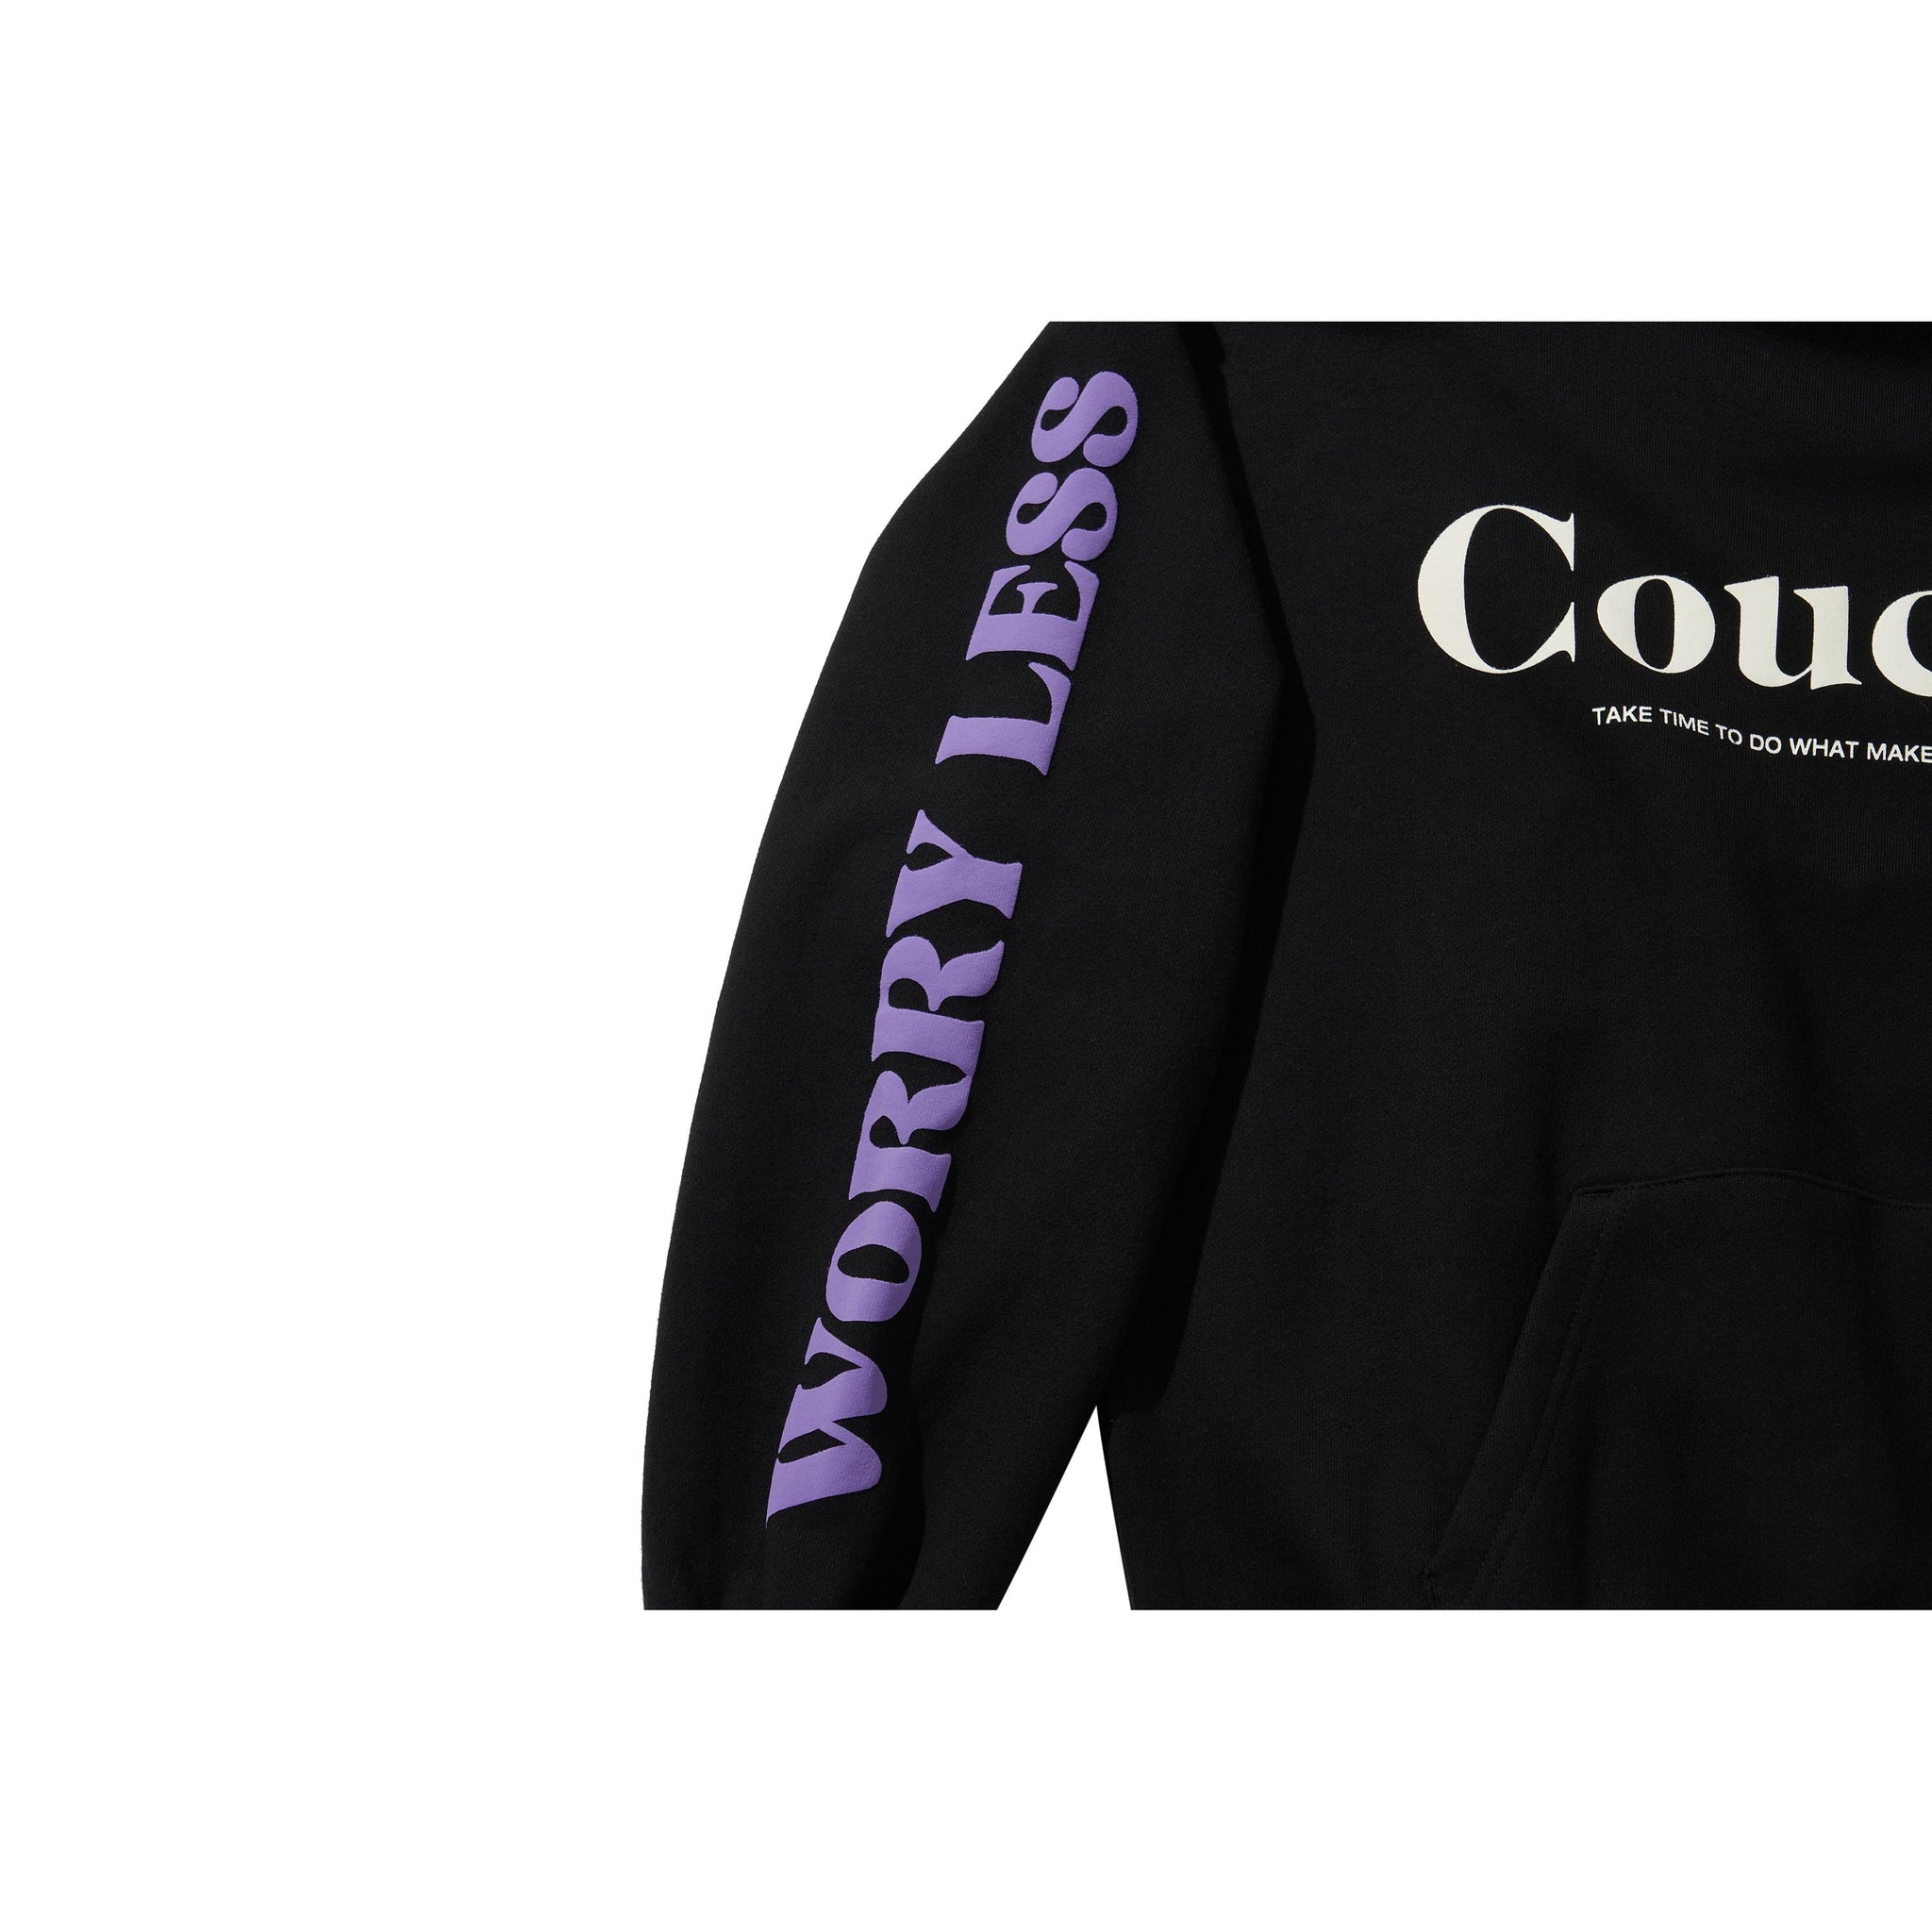 COUCH IT LOGO HOODIE / BLACK